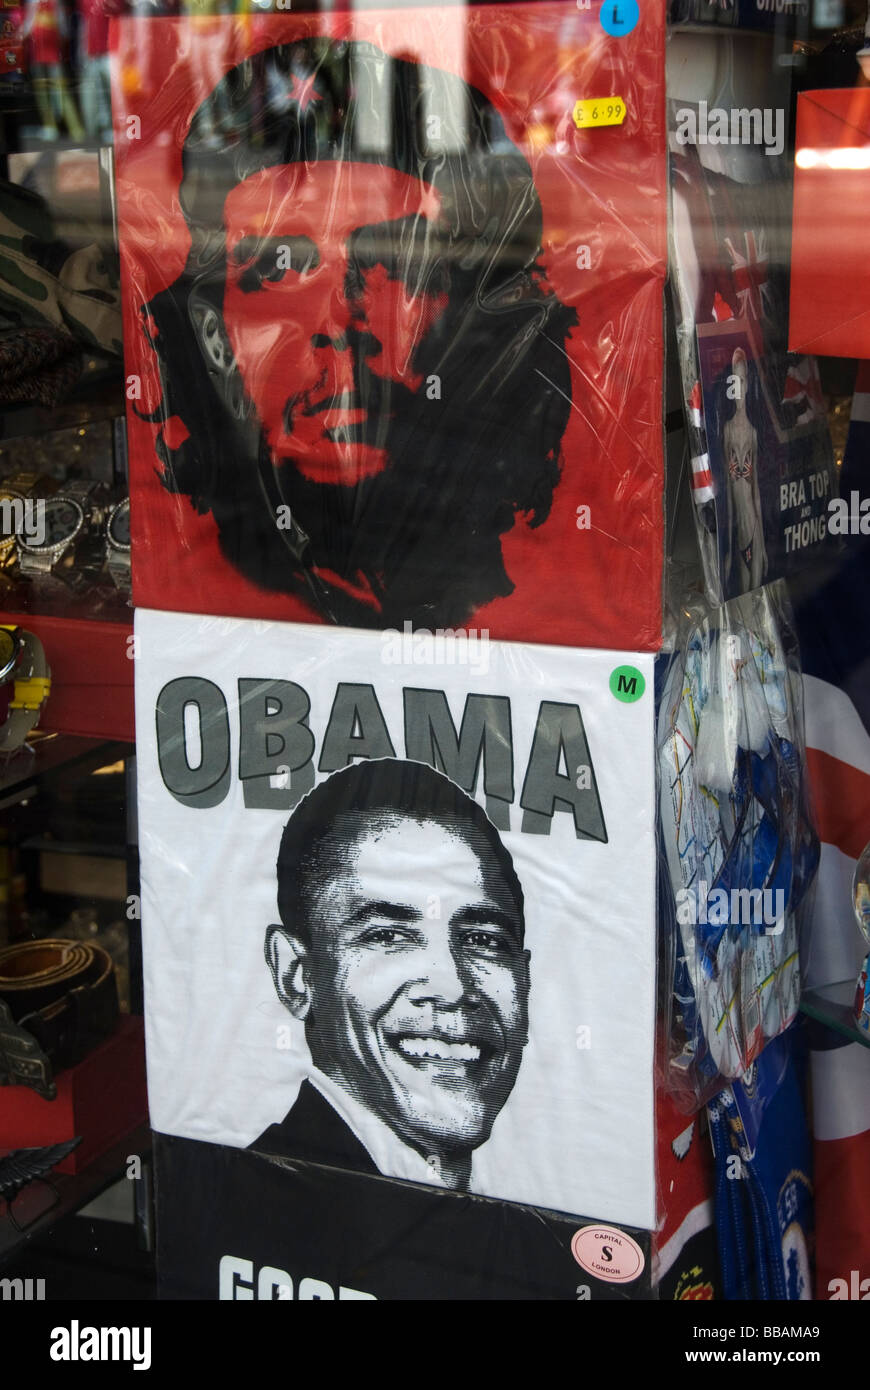 Oxford street May23rd 2009 Obama and Che Guevara t shirts on sale Stock Photo